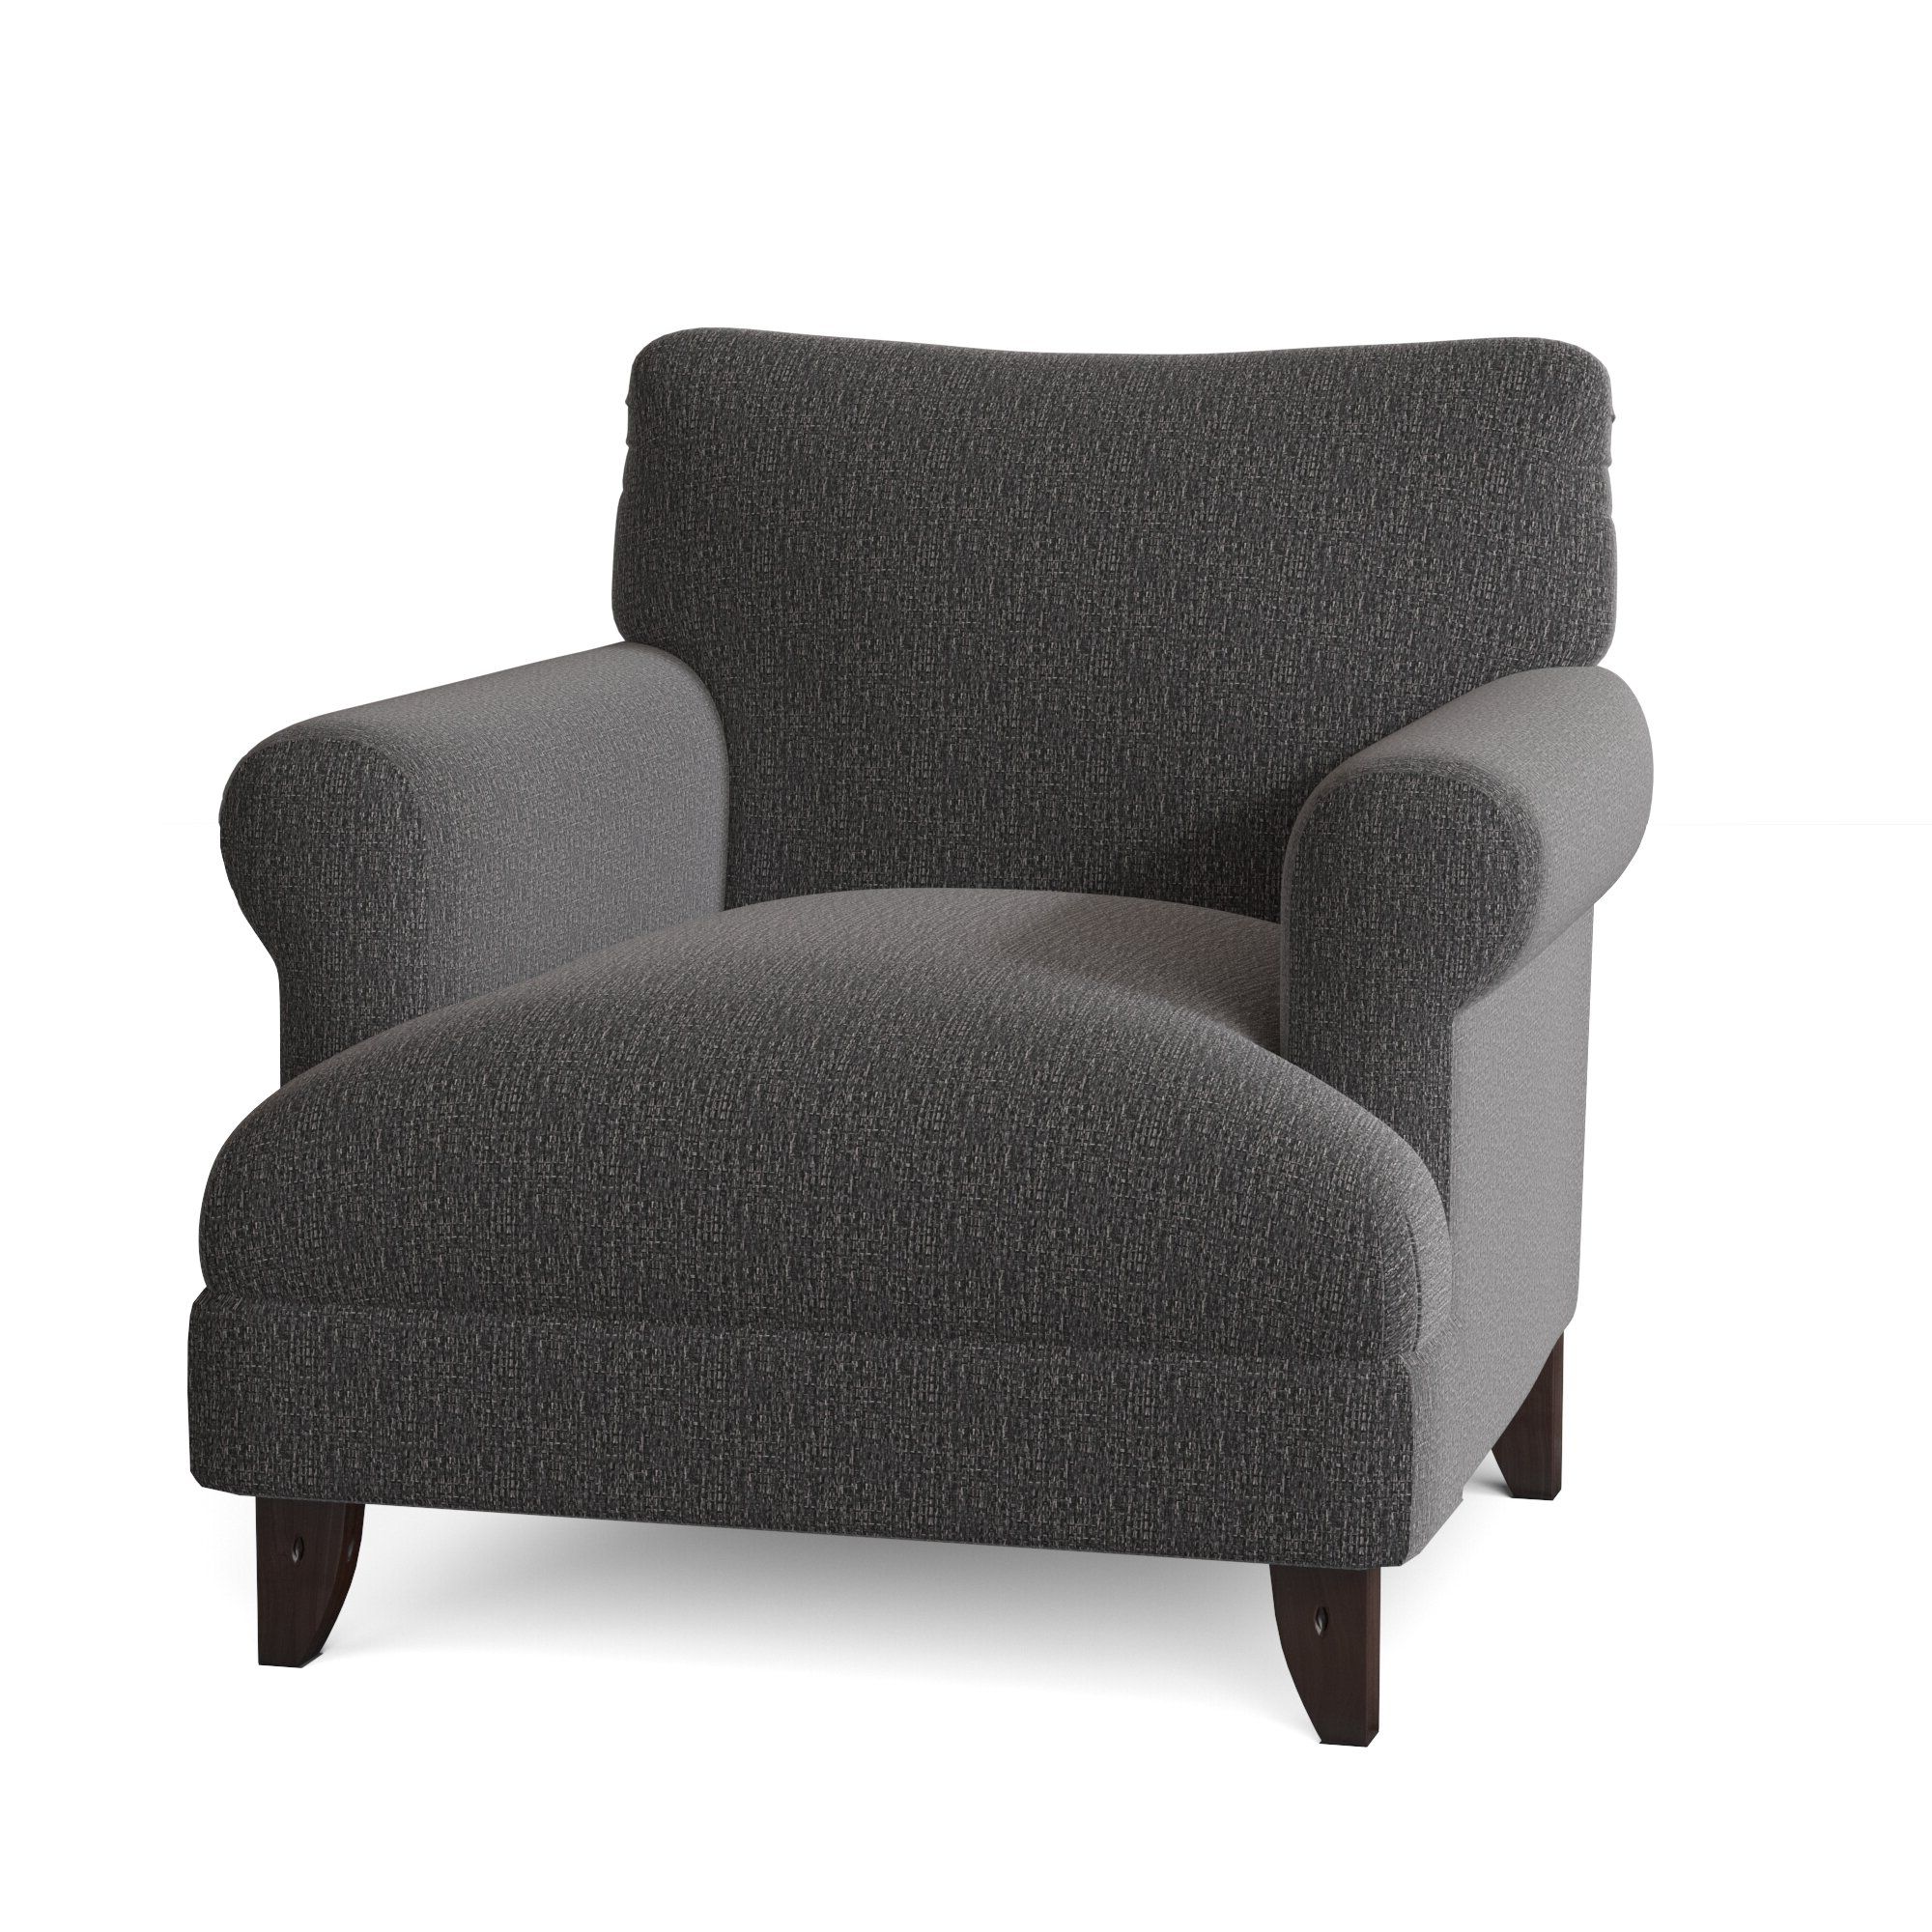 2019 Black Silver Accent Chairs You'll Love In  (View 11 of 20)